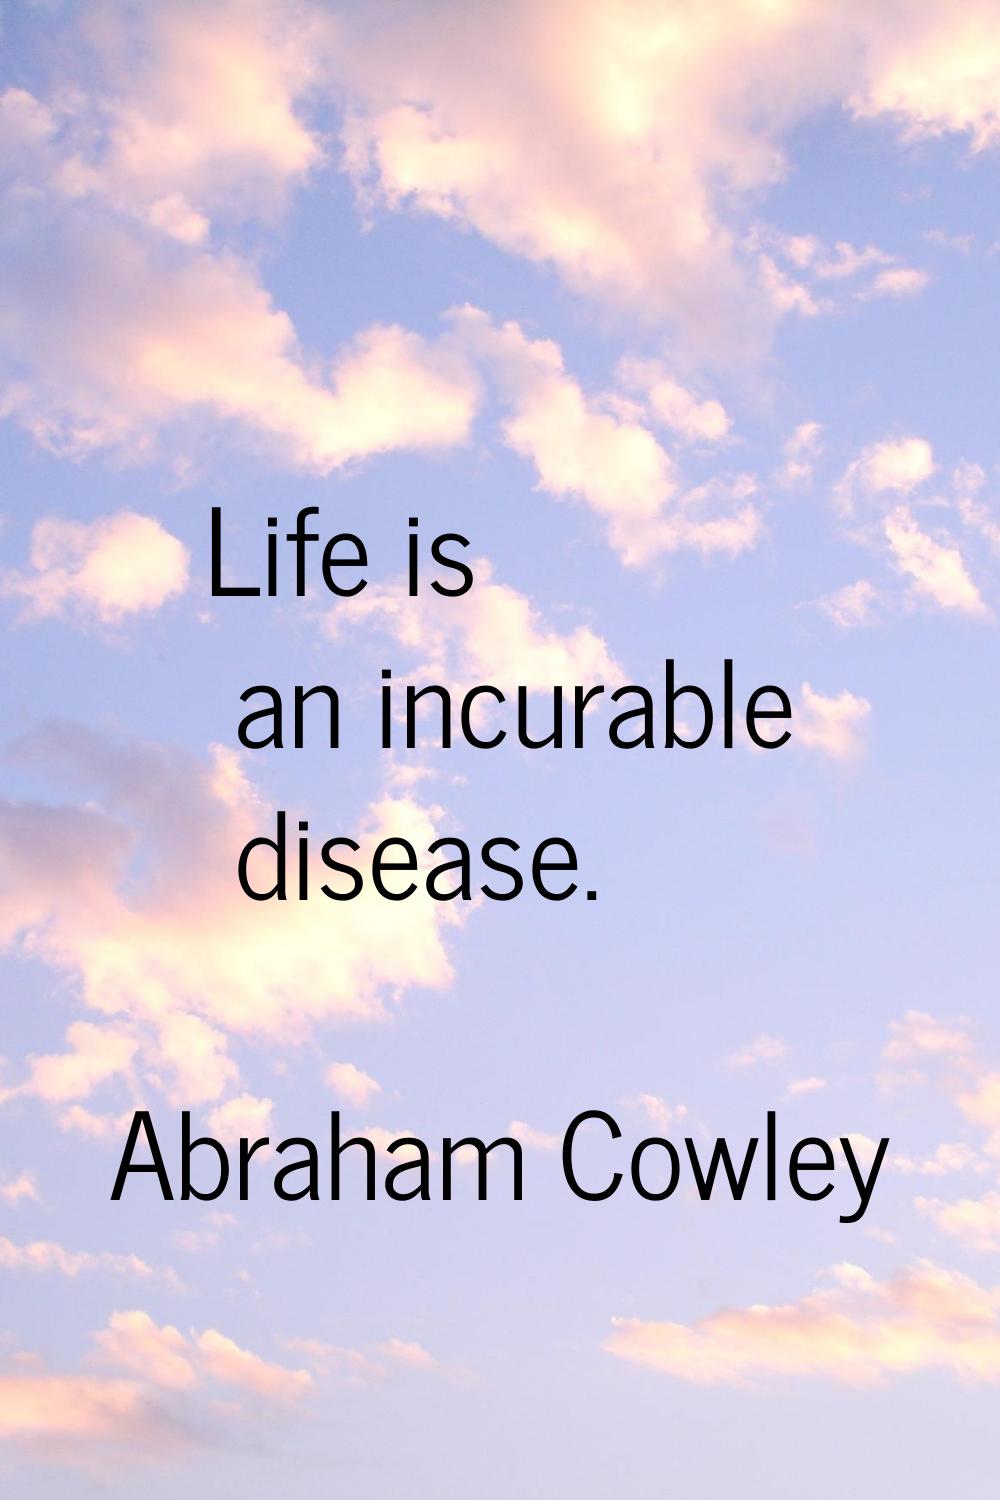 Life is an incurable disease.